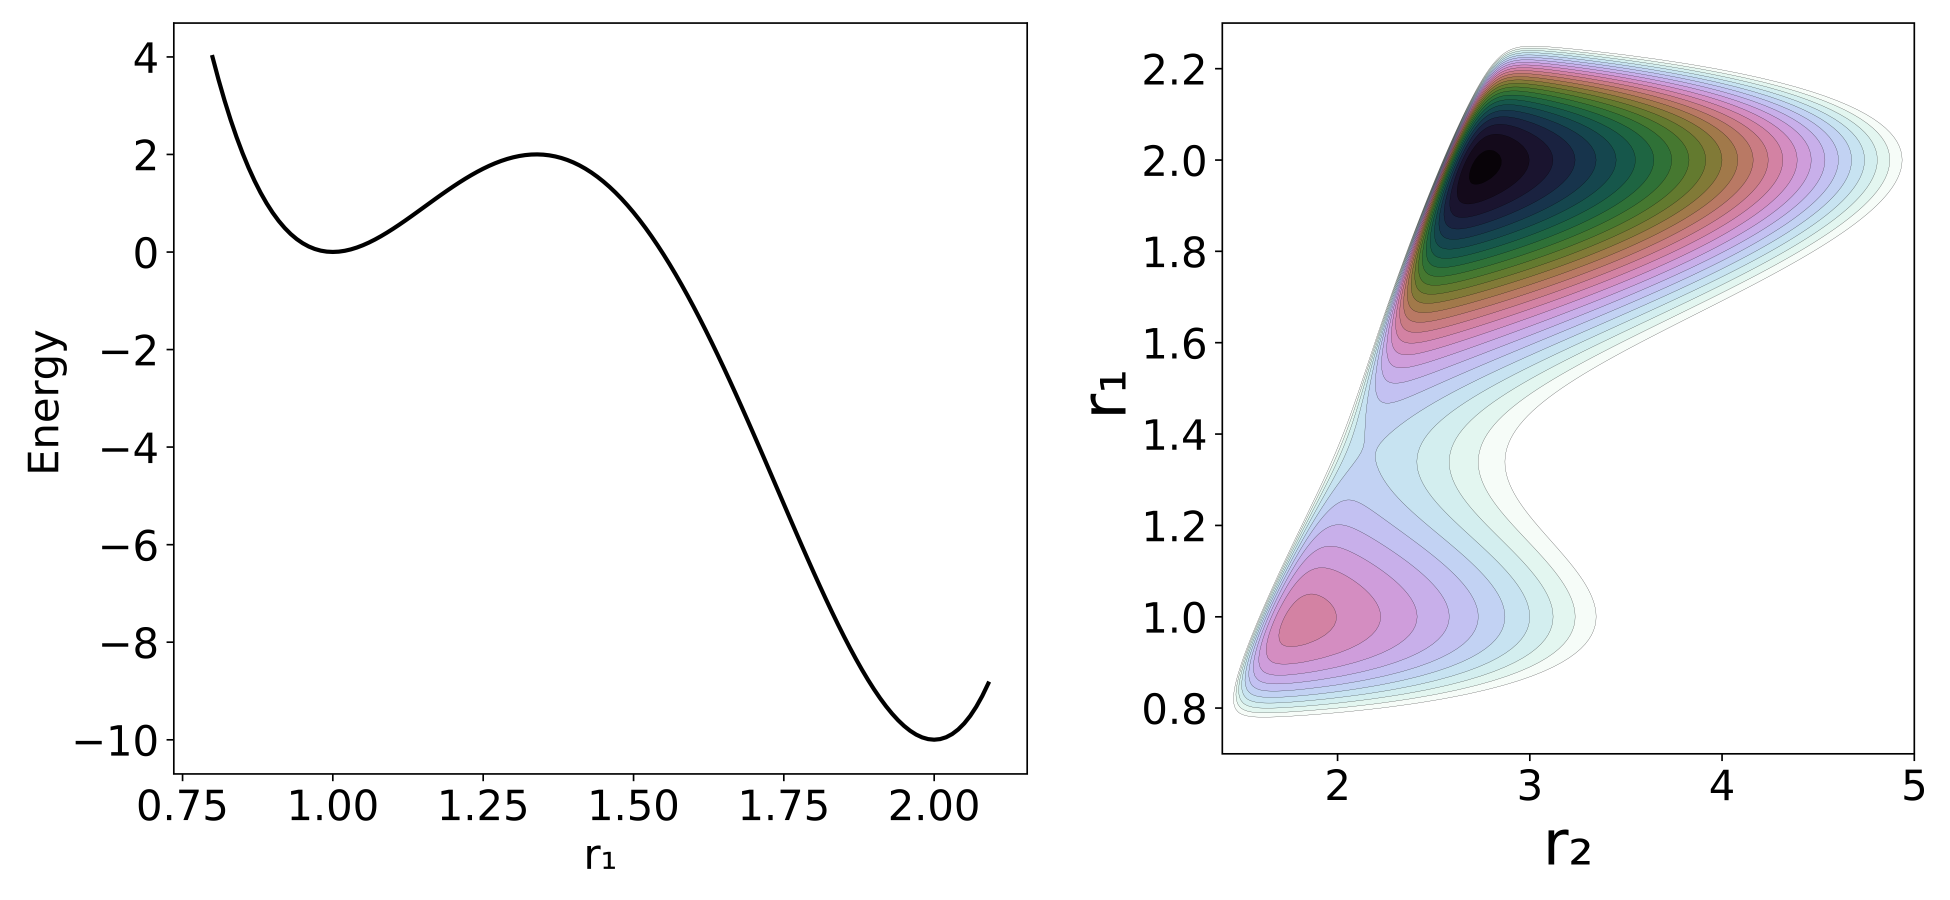 (Left)Reactive system's potential energy profile. (Right) Contours of the full potential energy surface. The contours are depicted in the $-7 \leq V \leq 6$ interval.